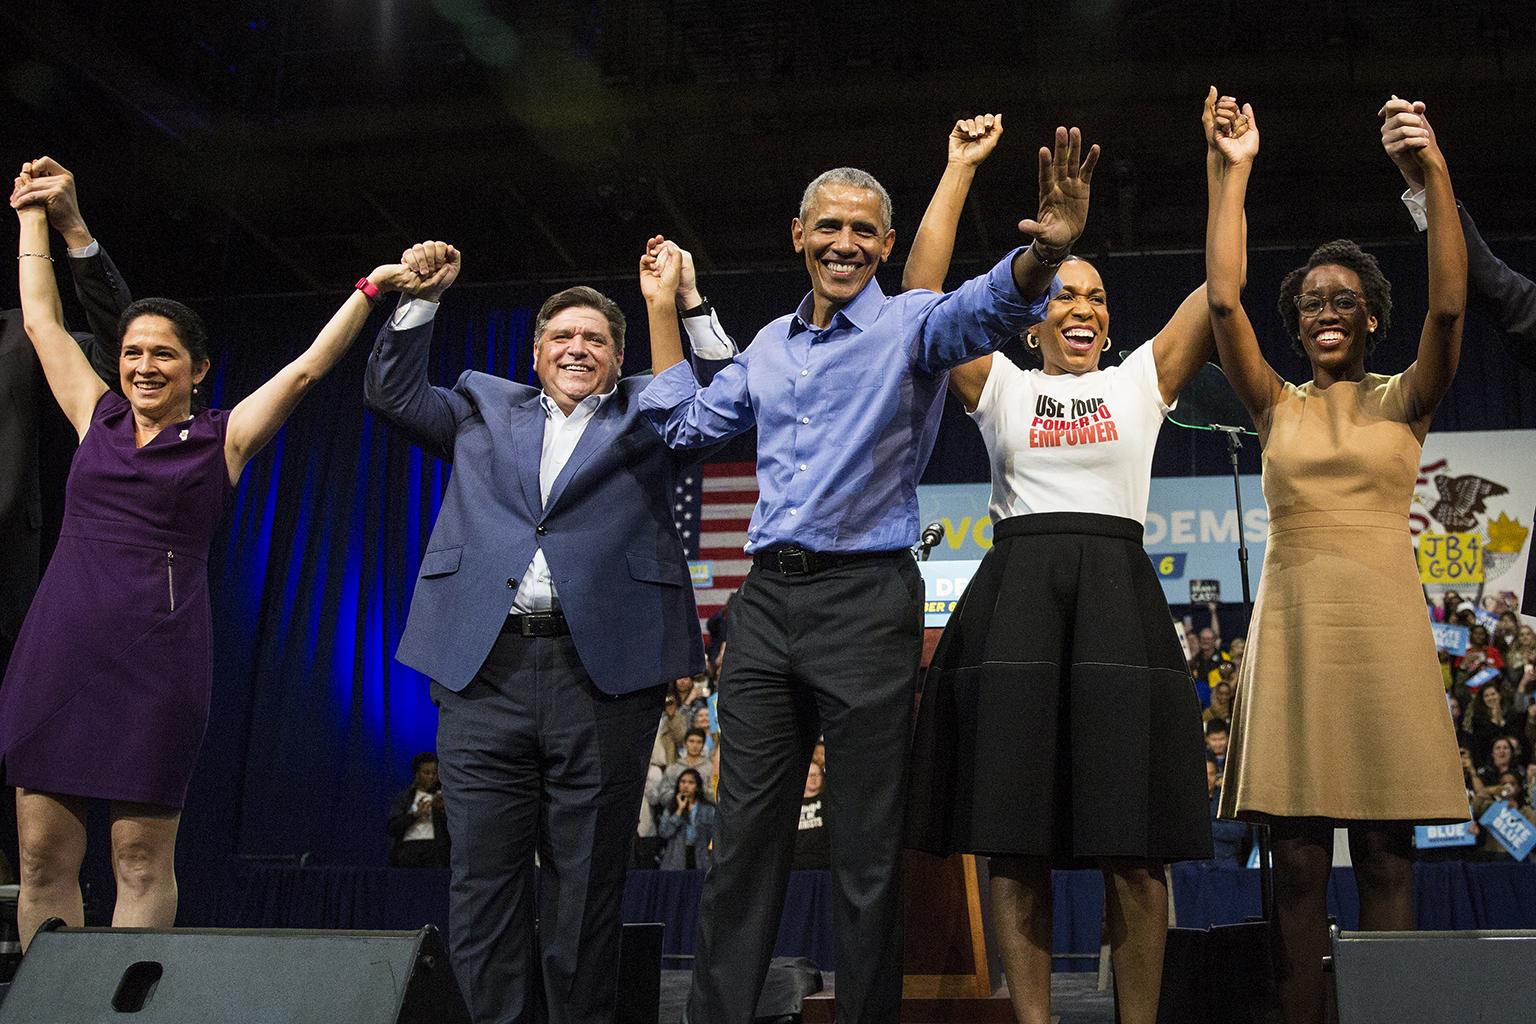 Former President Barack Obama, center, headlines a rally and appears alongside, from left to right, Illinois Comptroller Susana Mendoza, gubernatorial candidate J.B. Pritzker, lieutenant governor candidate Juliana Stratton and congressional candidate Lauren Underwood on Sunday, Nov. 4, 2018 at the University of Illinois at Chicago. (Ashlee Rezin / Chicago Sun-Times via AP)